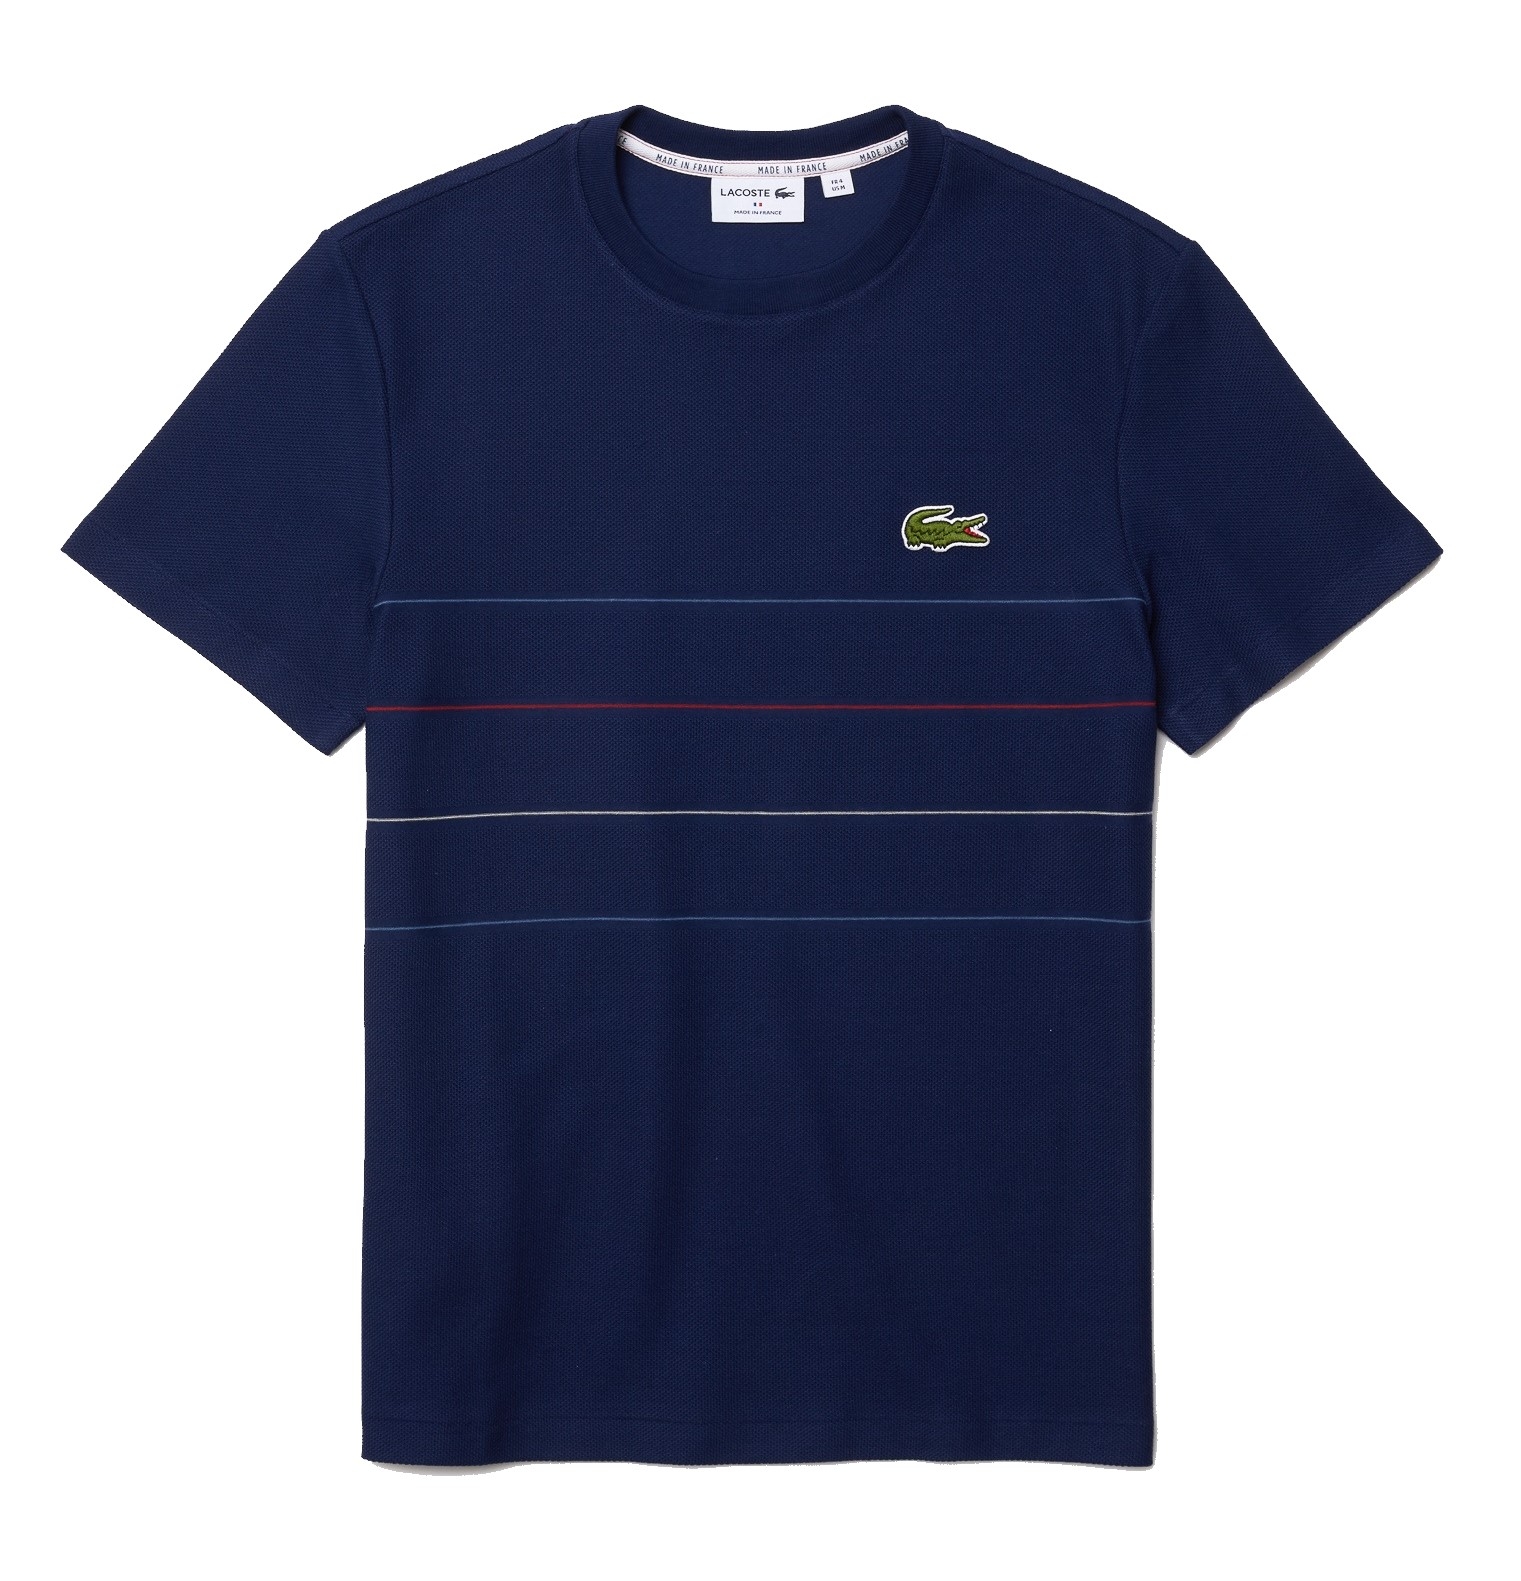 Lacoste "made In France" Textured Striped Organic Cotton Tee Blue